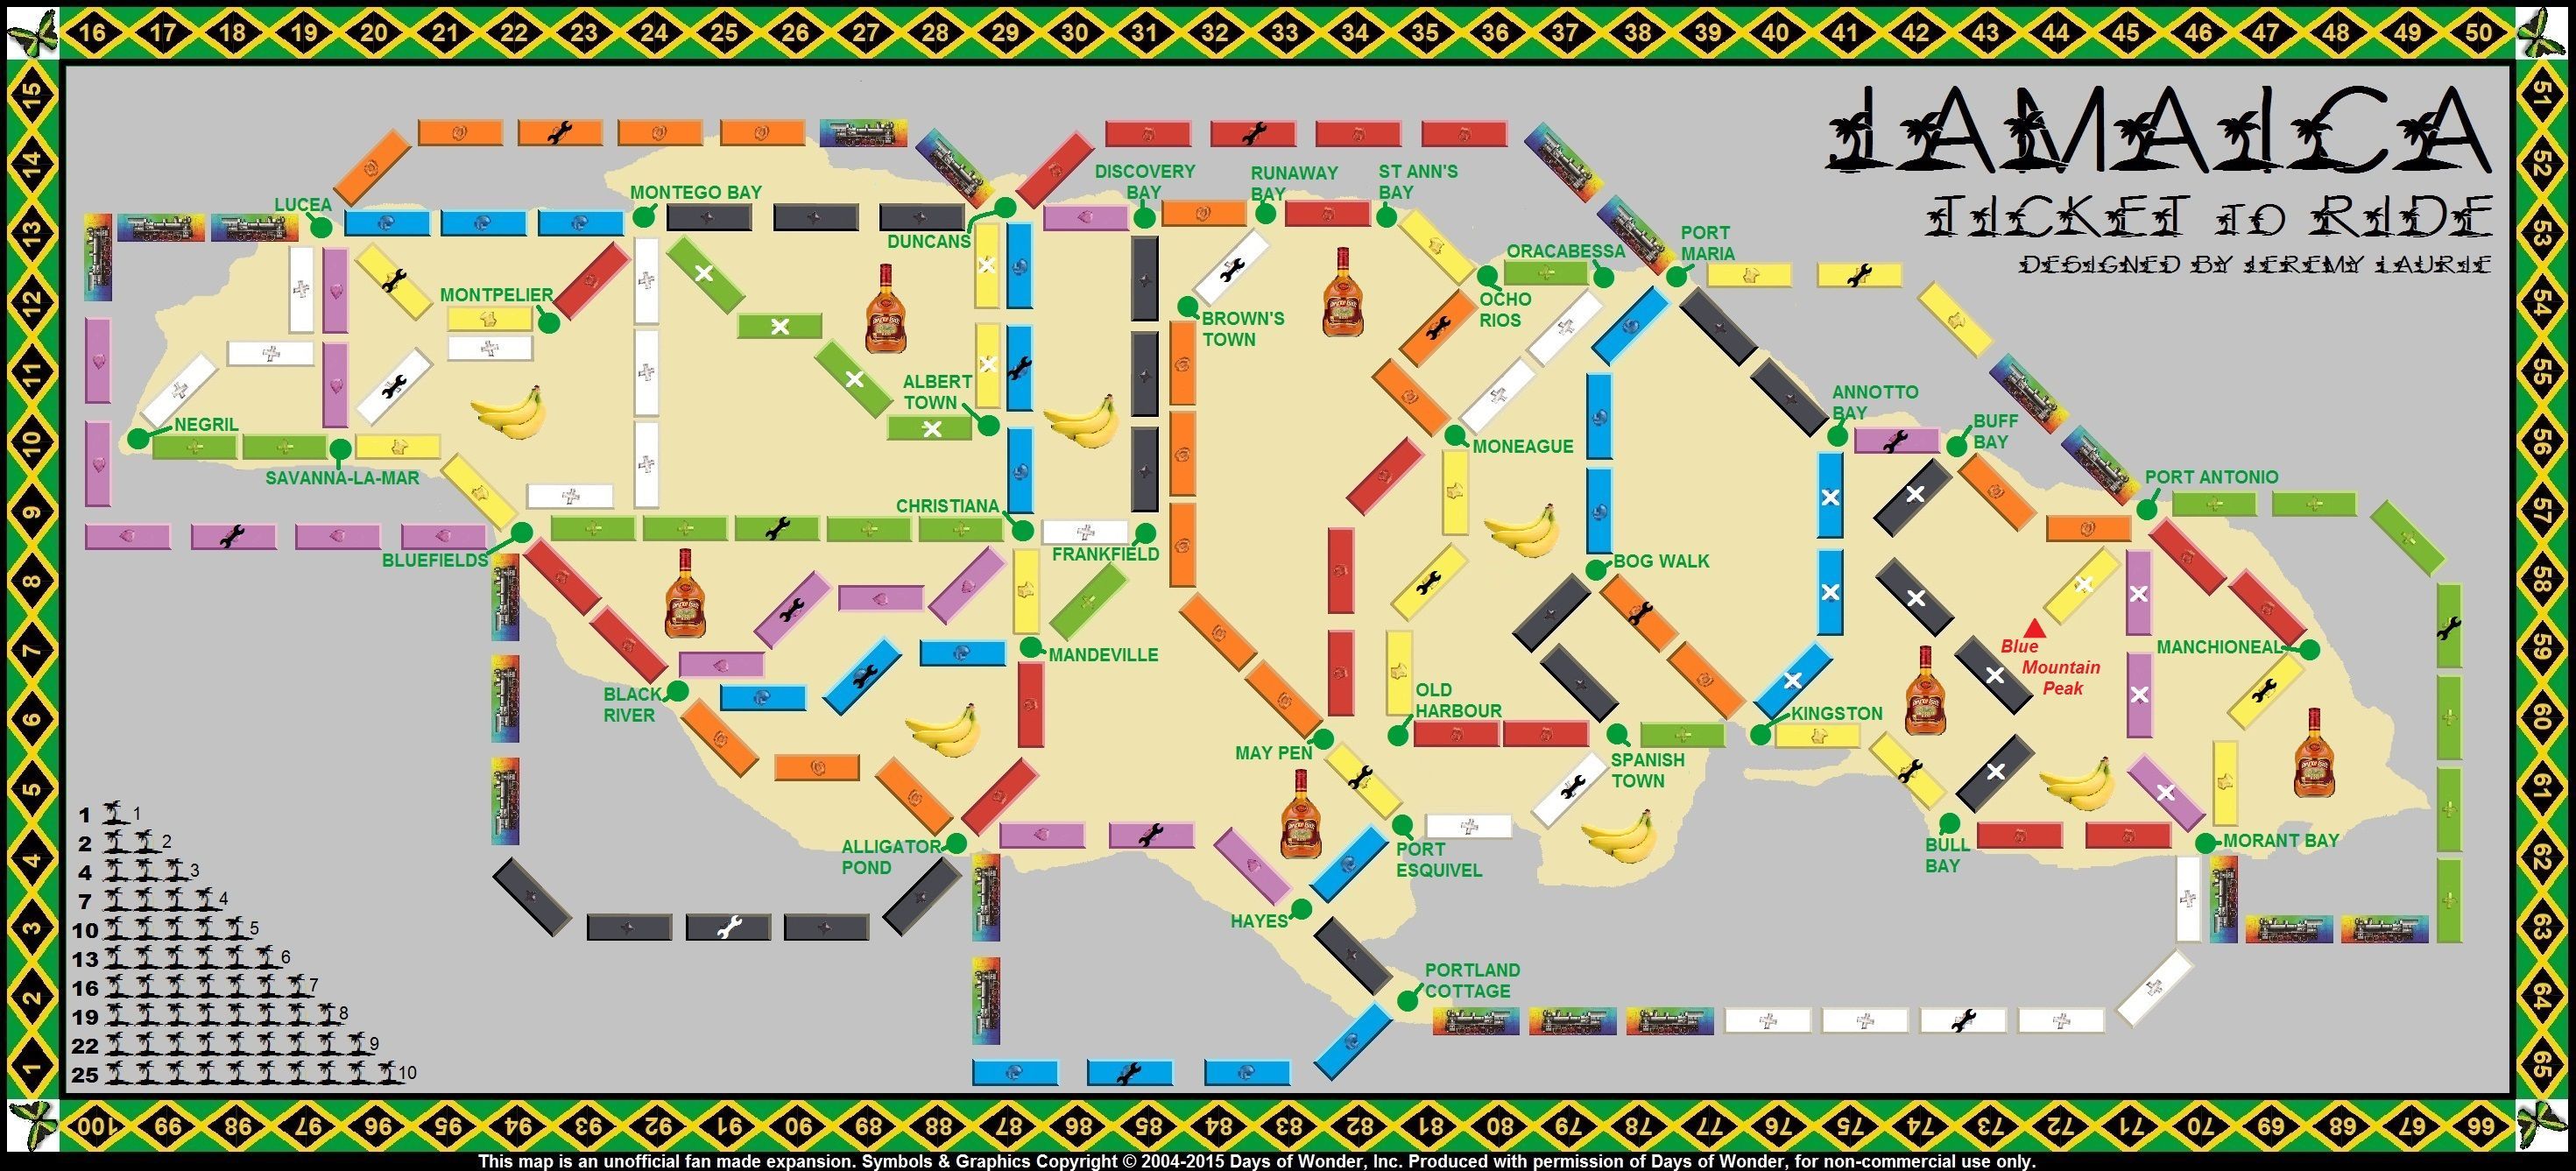 Jamaica (fan expansion for Ticket to Ride)